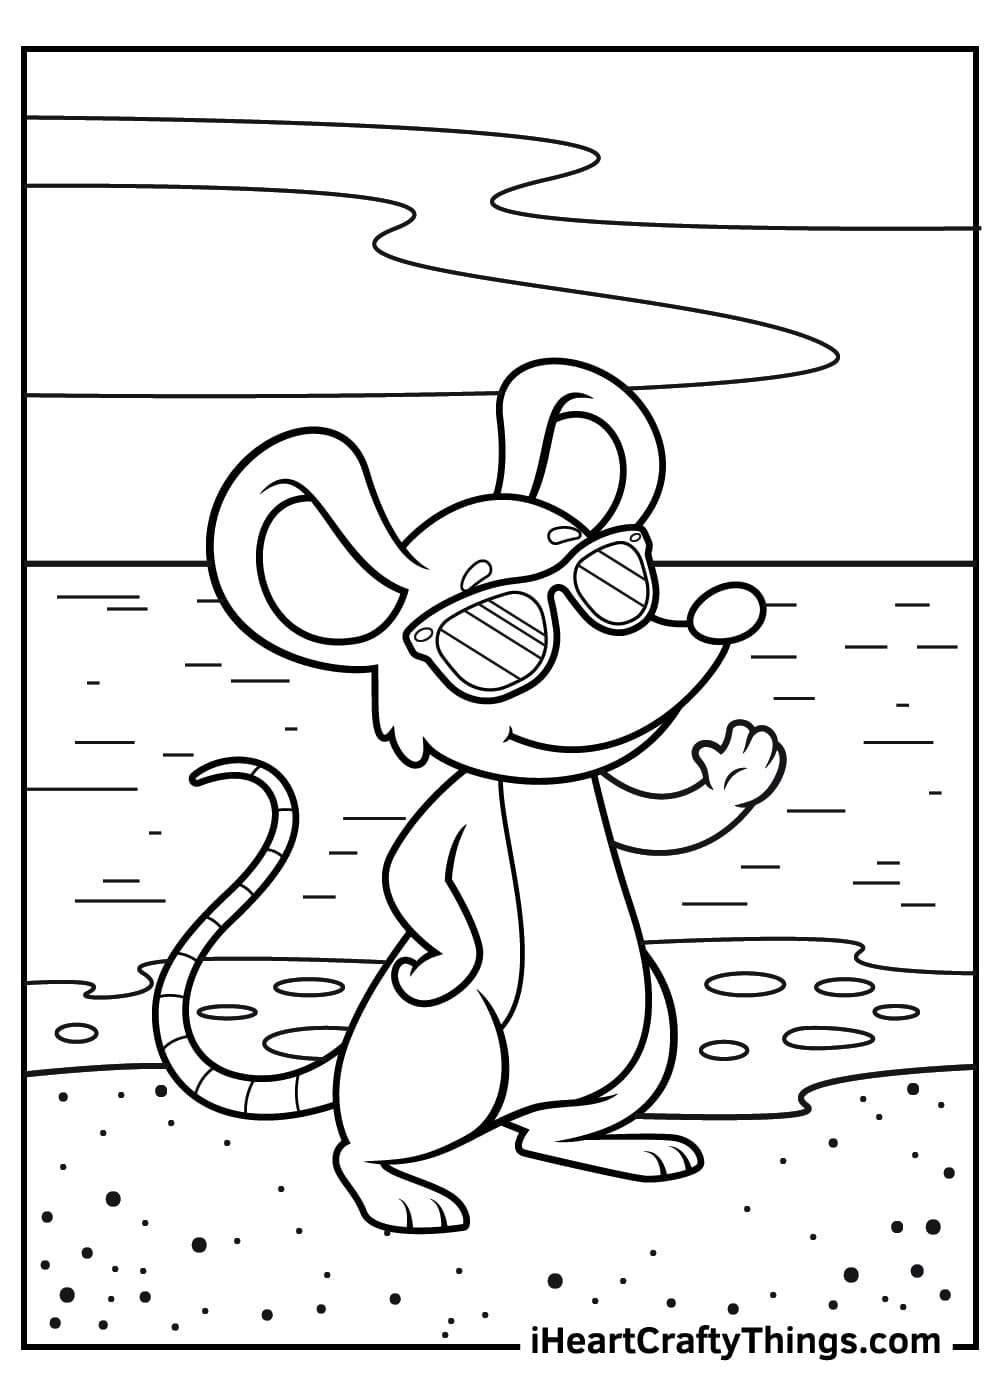 Mice go beach Coloring Page